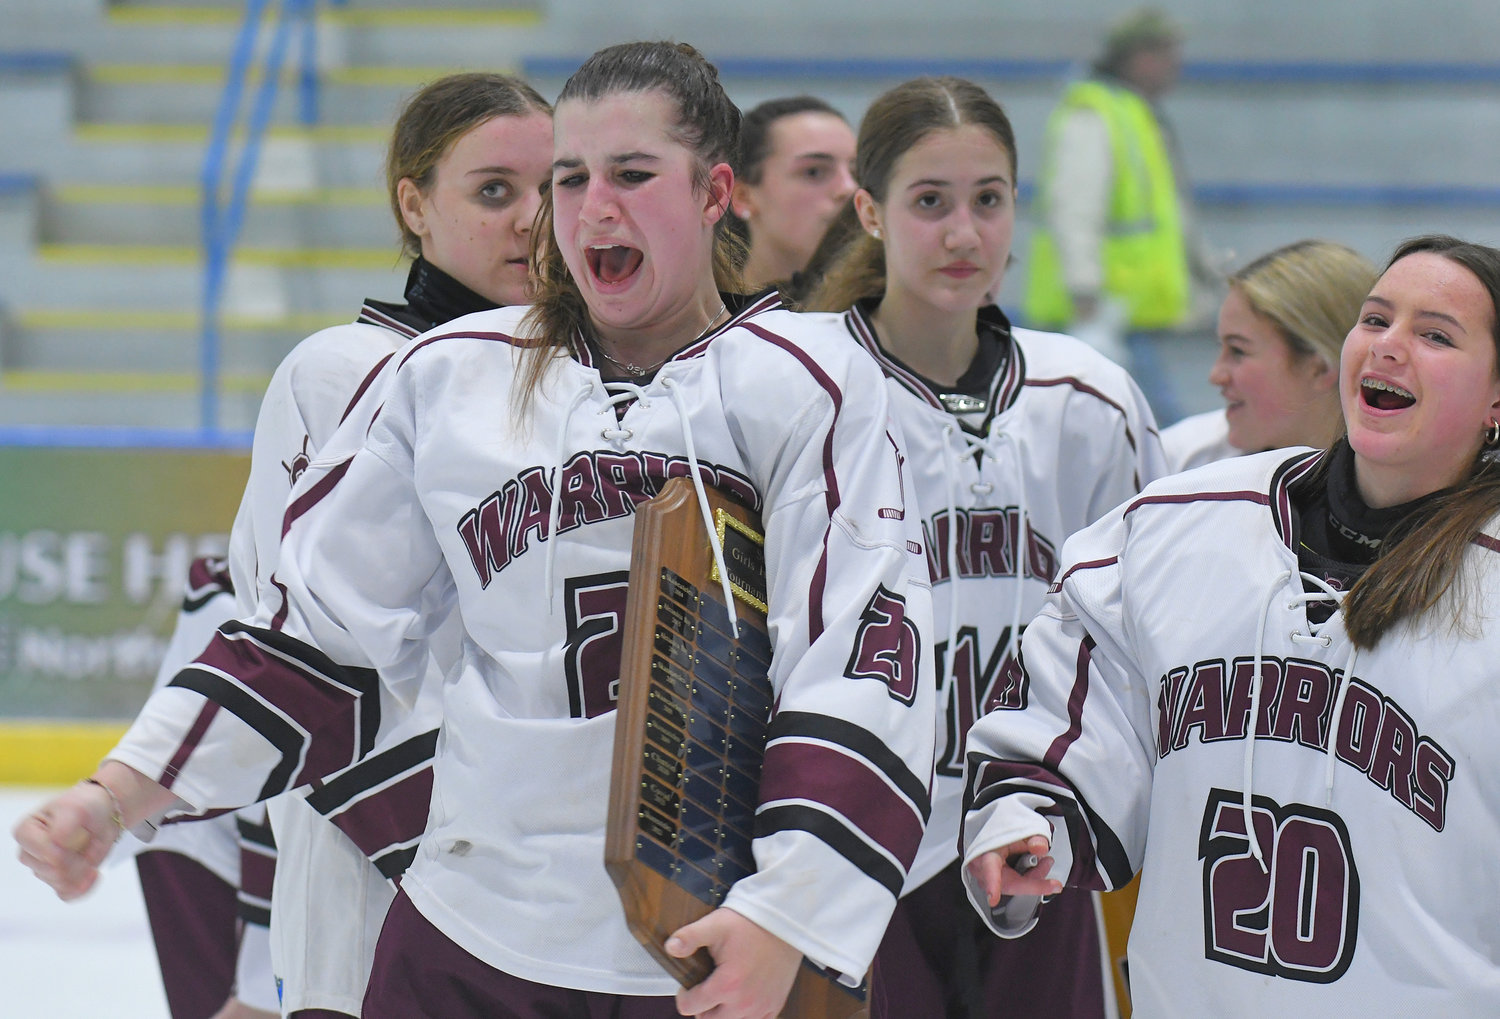 Clinton's Mackinley Ronan clutches the Section III girls ice hockey championship plaque and shouts during the team's celebration after defeating the Skaneateles Lakers Wednesday in Nedrow. Ronan, a sophomore who attends New Hartford and plays for the unified Clinton team, had the overtime goal that won the game 1-0.